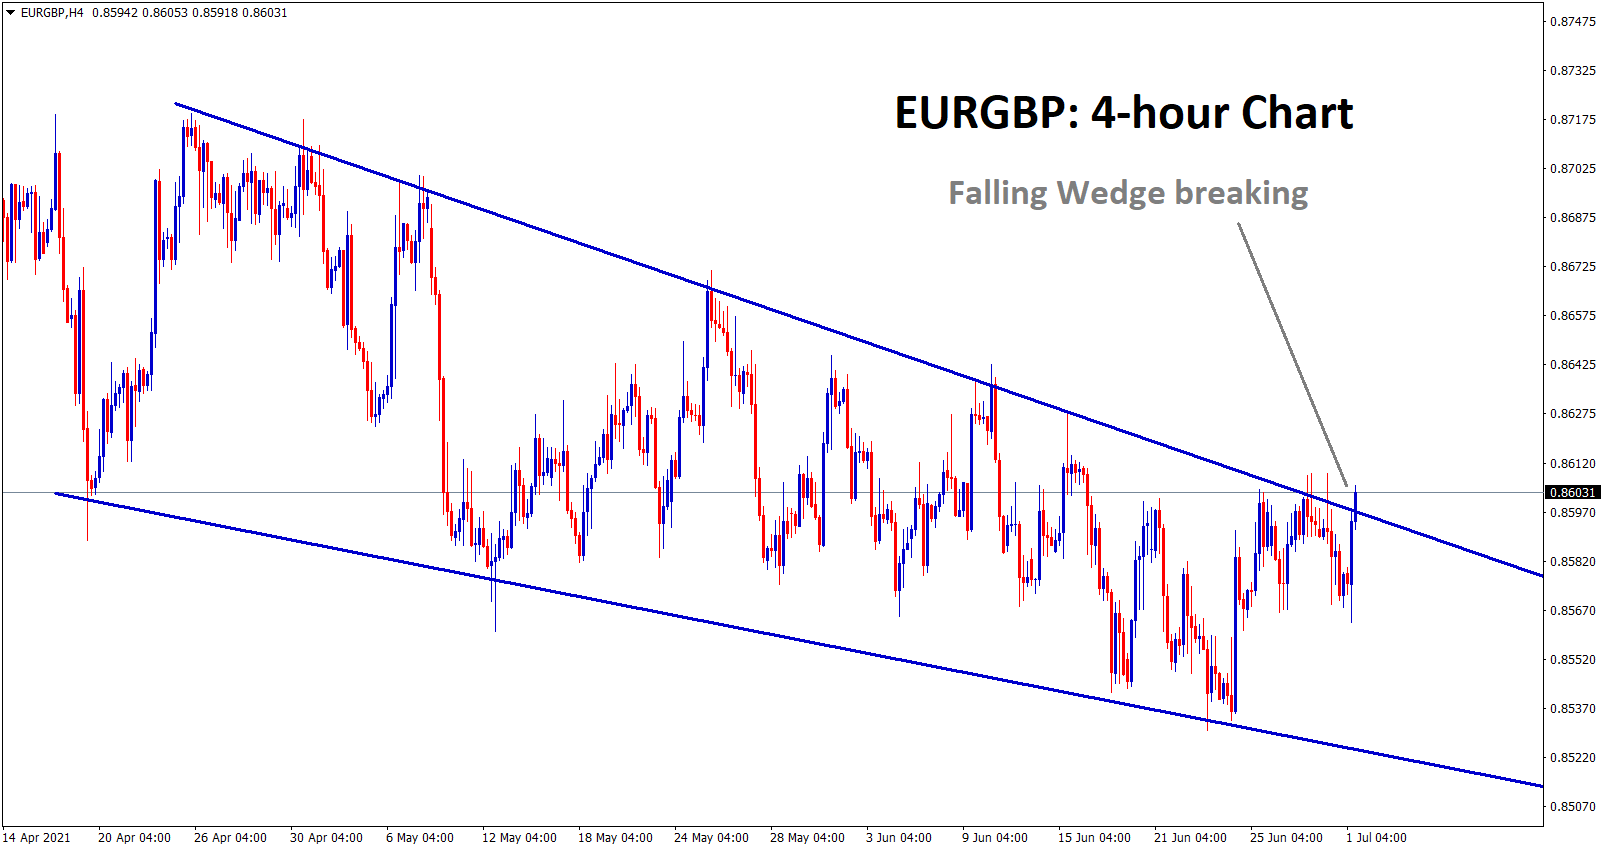 Eurgbp is breaking the top level of the falling wedge